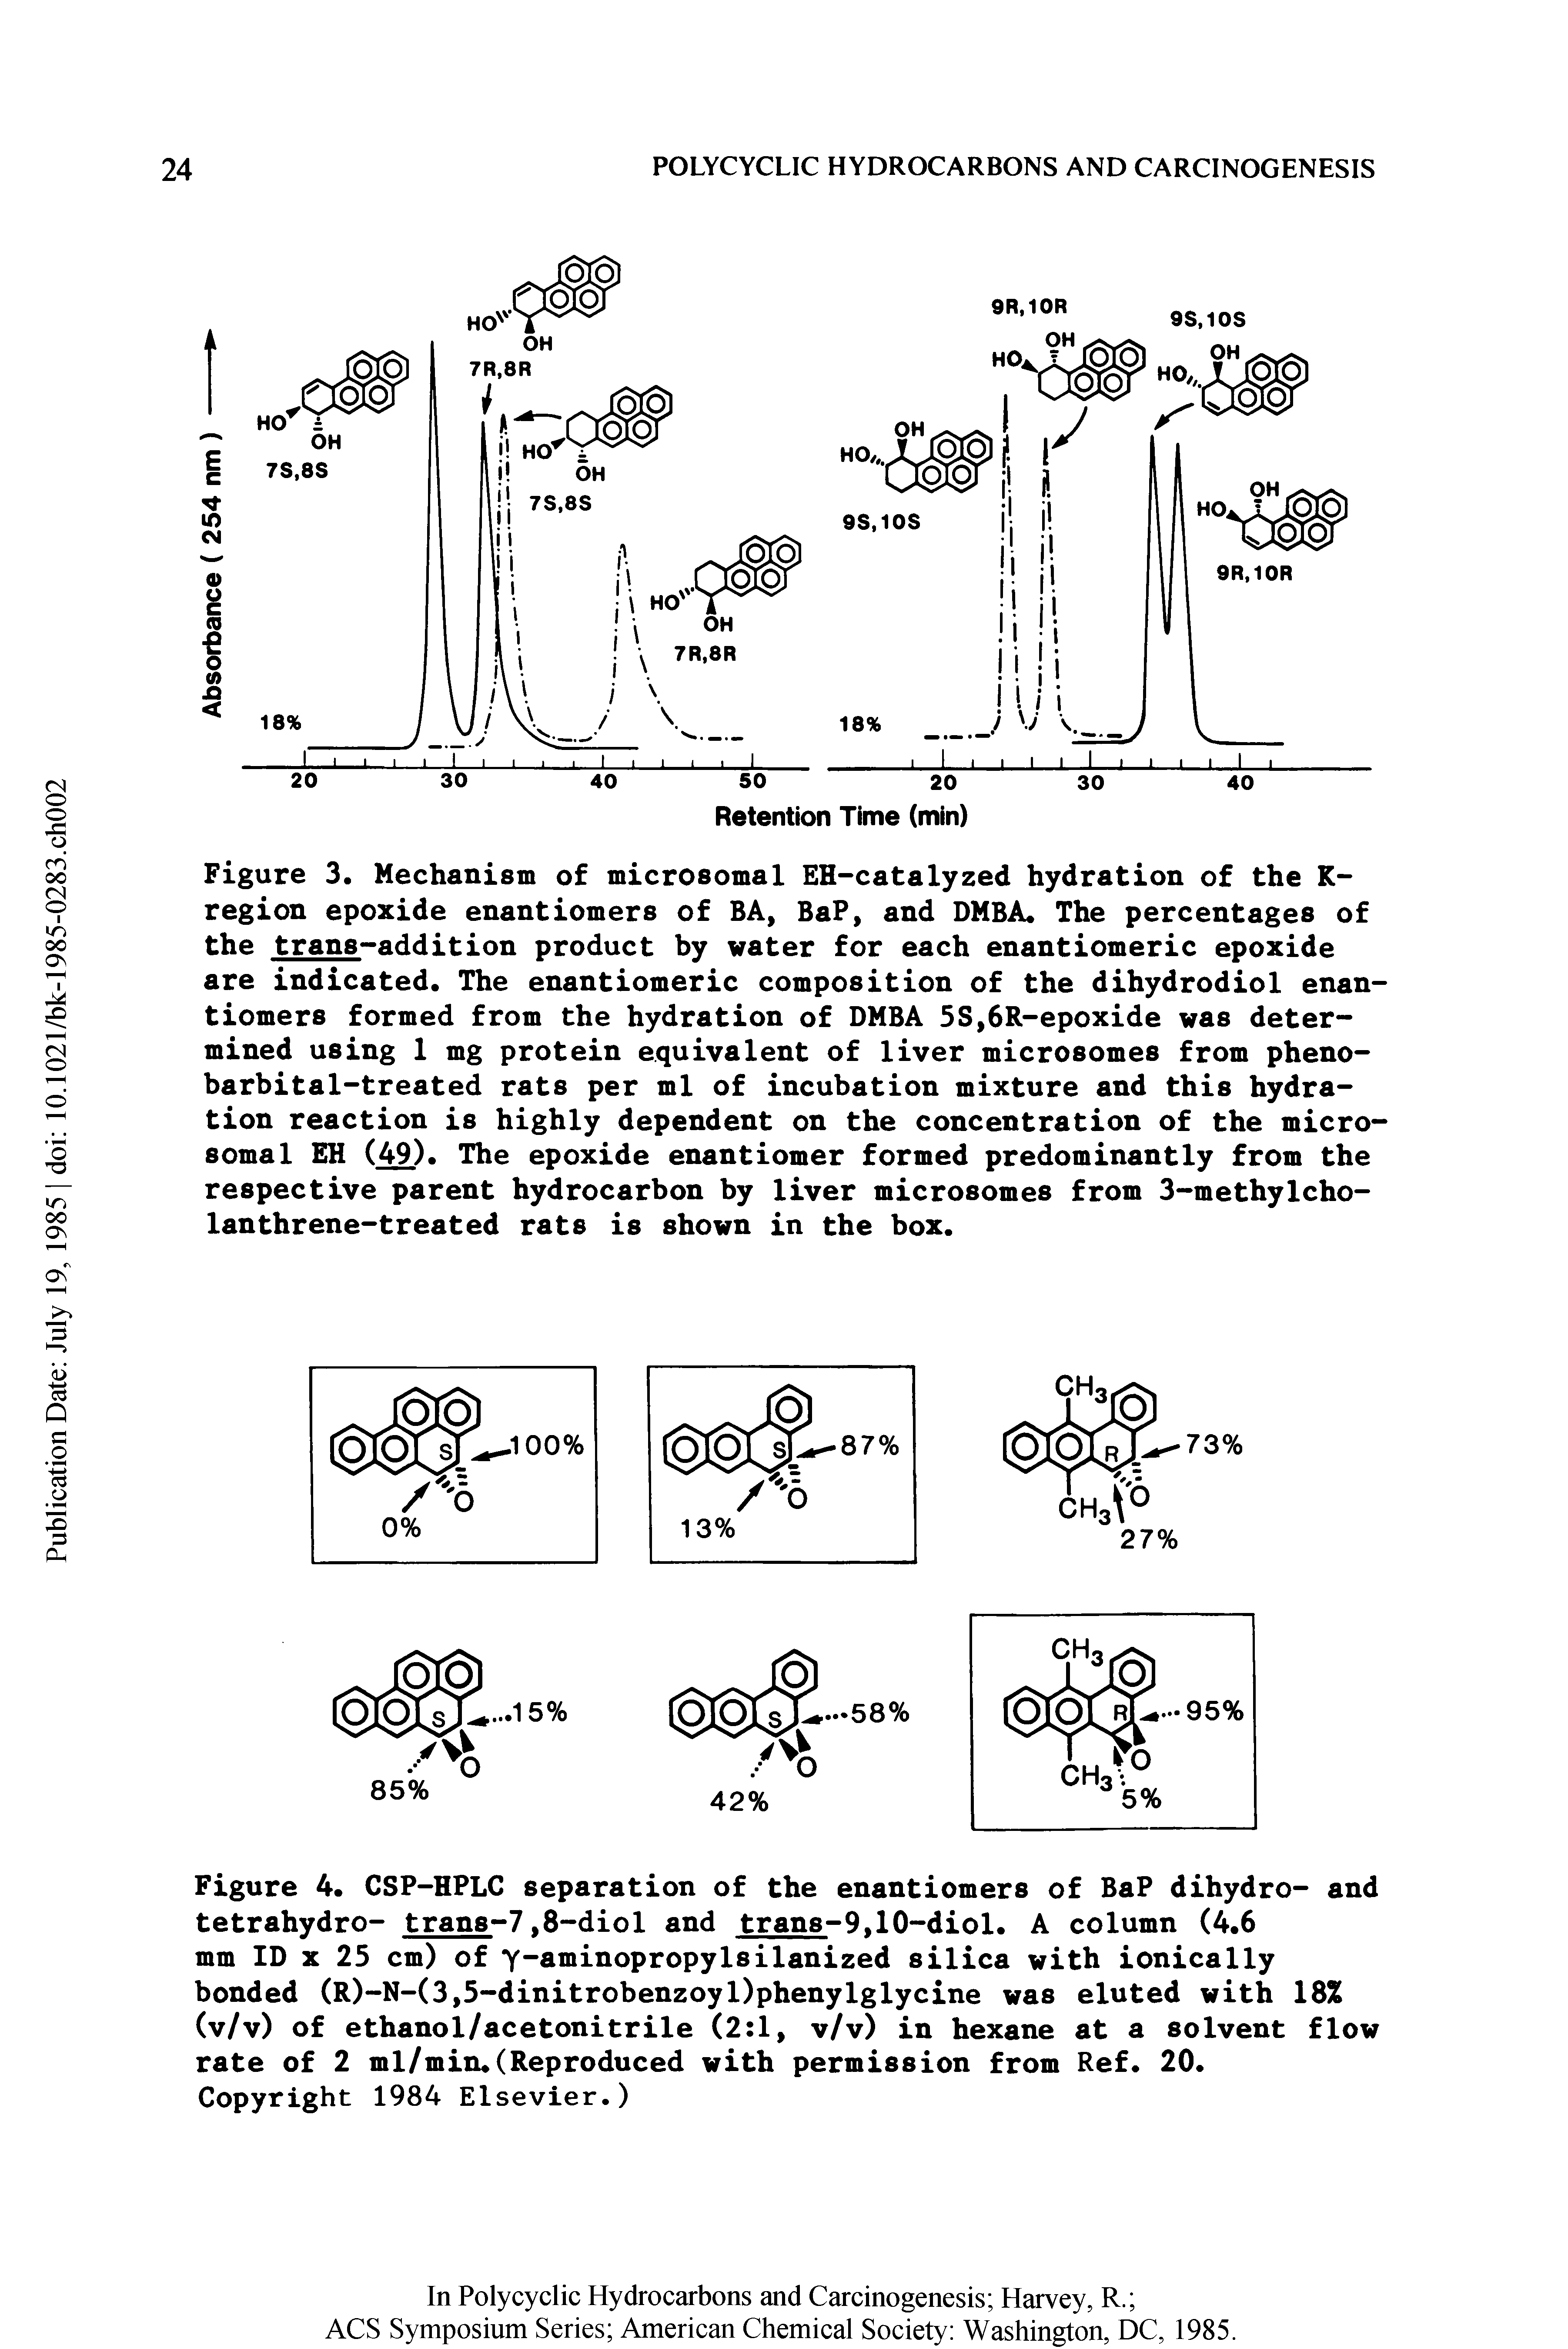 Figure 4. CSP-HPLC separation of the enantiomers of BaP dihydro- and tetrahydro- trans-7,8-diol and trans-9.10-diol. A column (4.6 mm ID x 25 cm) of y-aminopropylsilanized silica with ionically bonded (R)-N-(3,5-dinitrobenzoyl)phenylglycine was eluted with 18% (v/v) of ethanol/acetonitrile (2 1, v/v) in hexane at a solvent flow rate of 2 ml/min.(Reproduced with permission from Ref. 20.